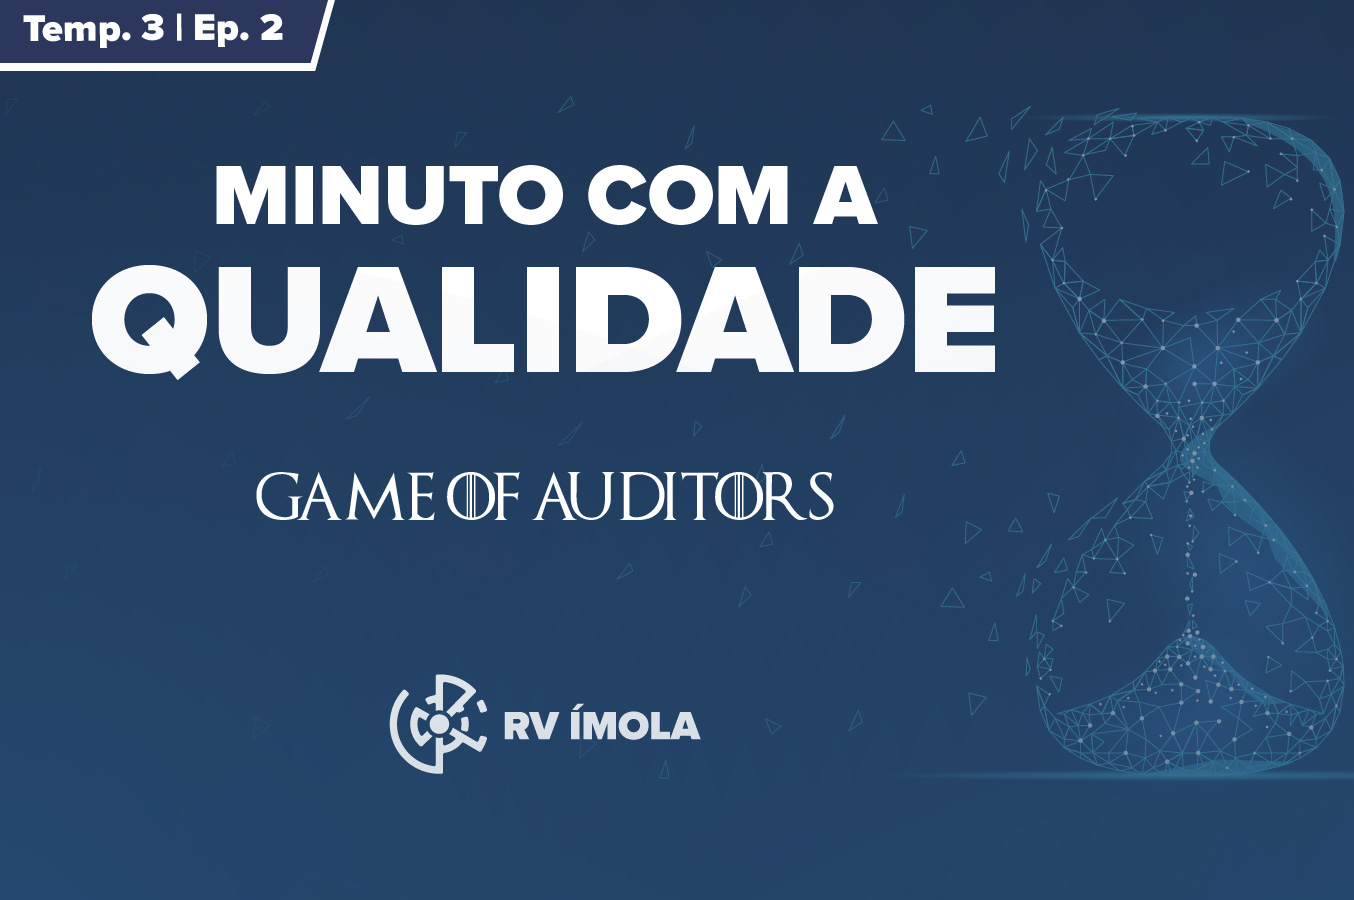 Game of auditors